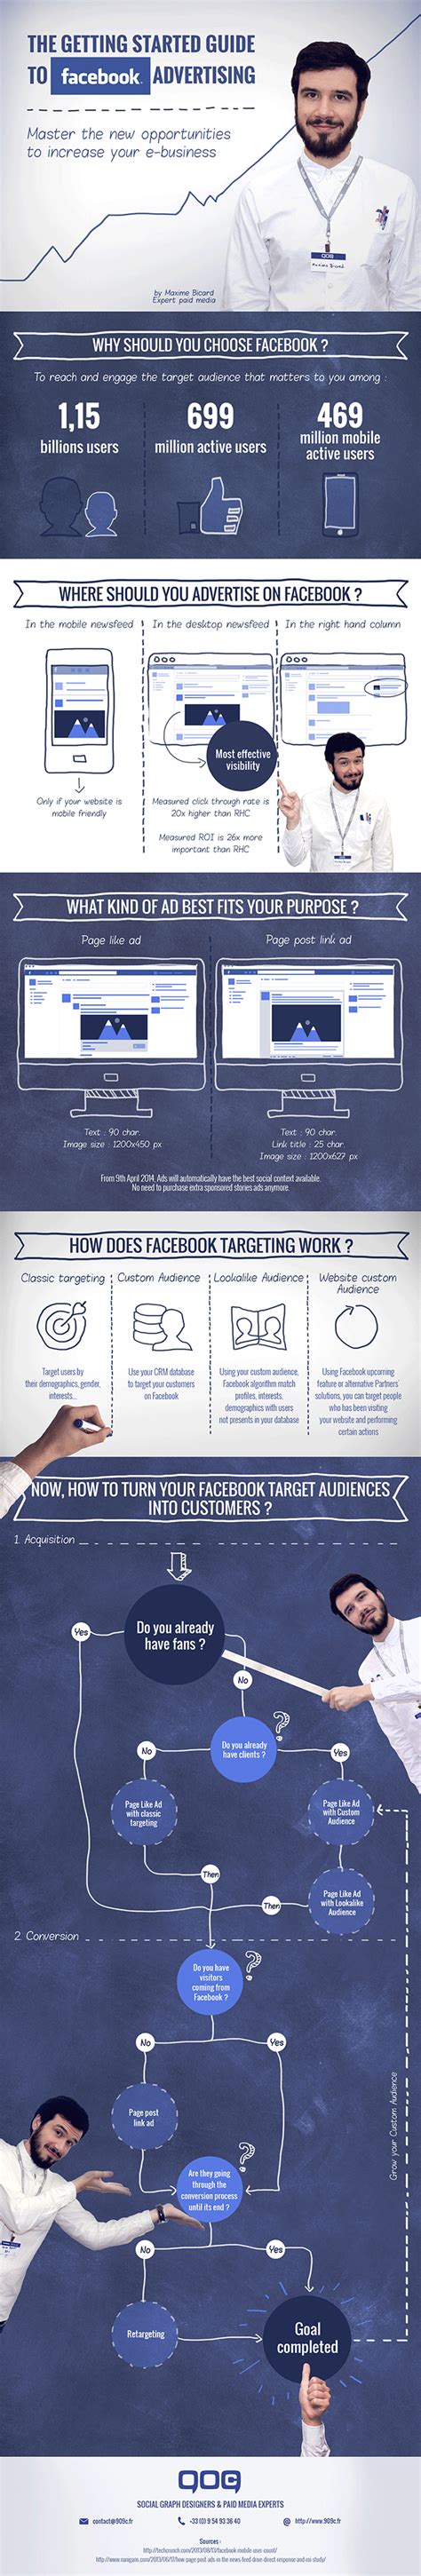 The Getting Started Guide To Facebook Advertising Infographic